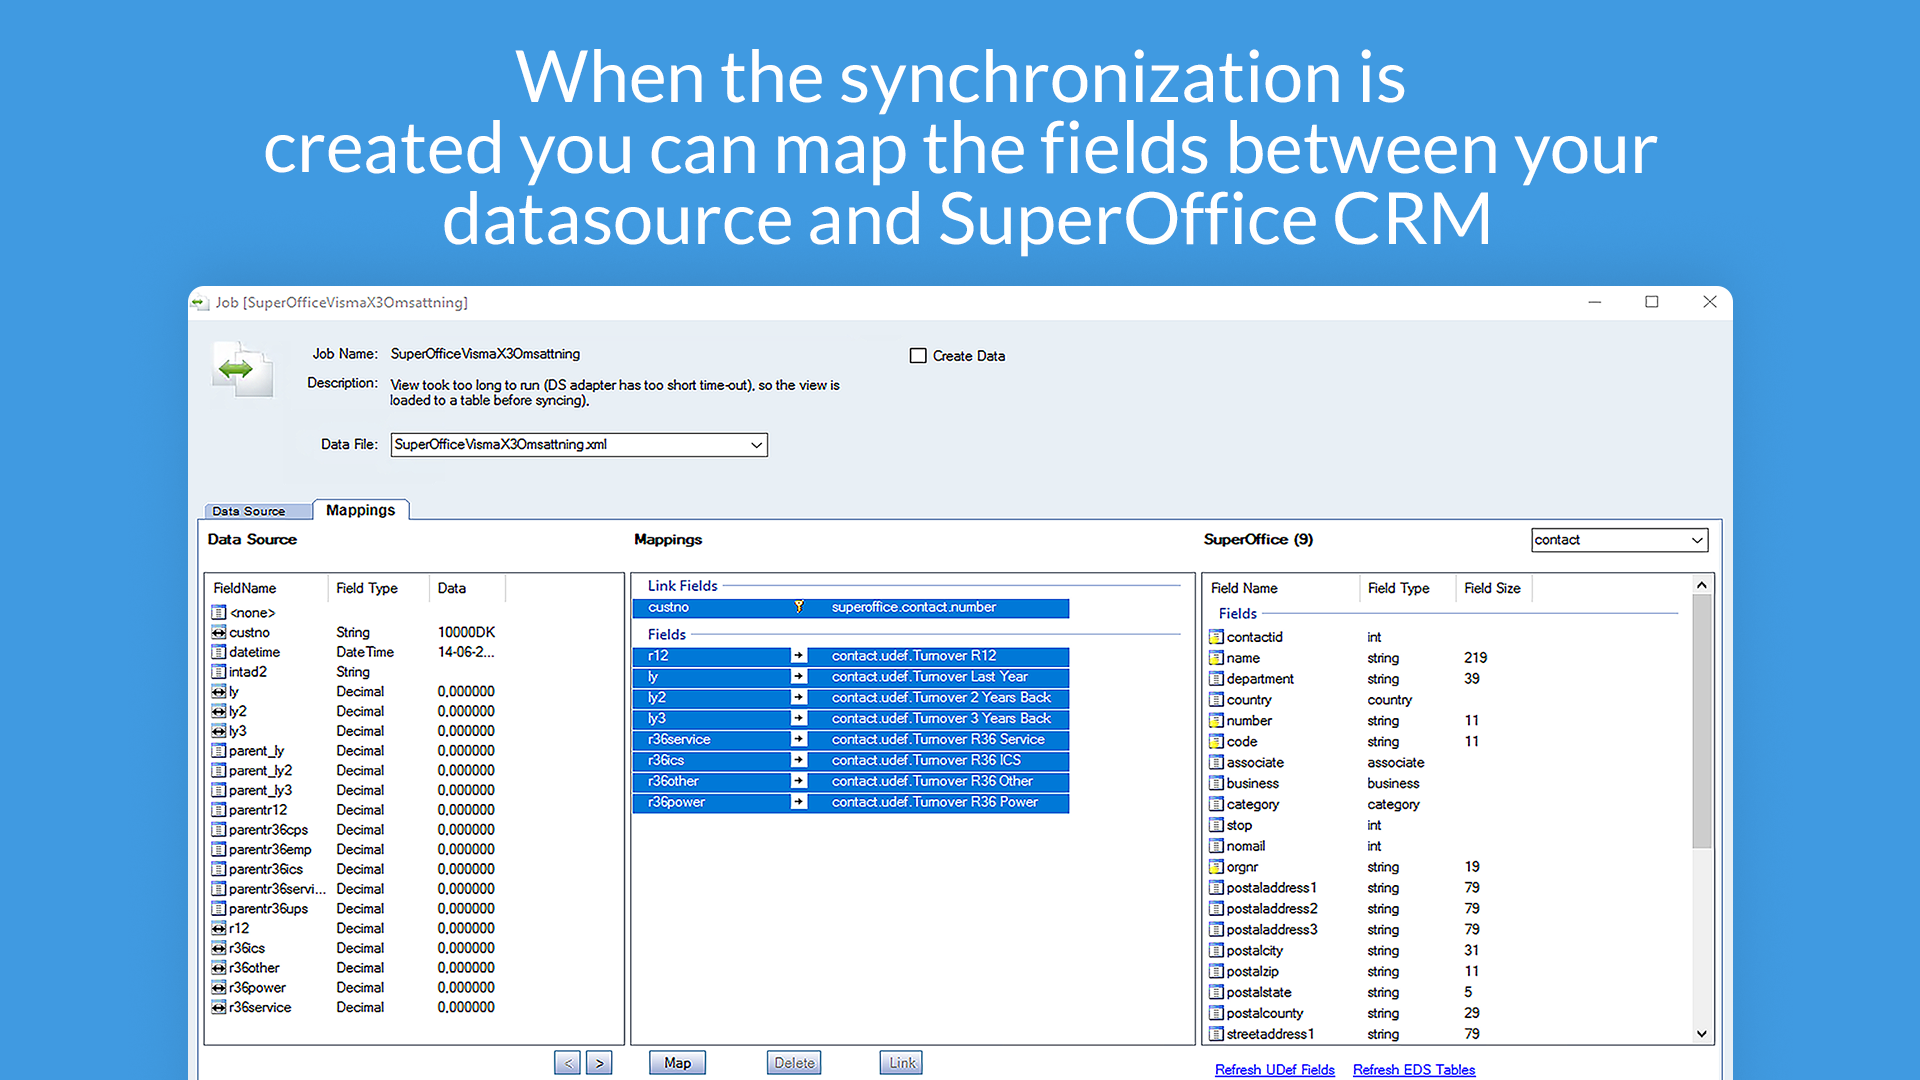 When the synchronization is created you can map the fields between your datasource and SuperOffice